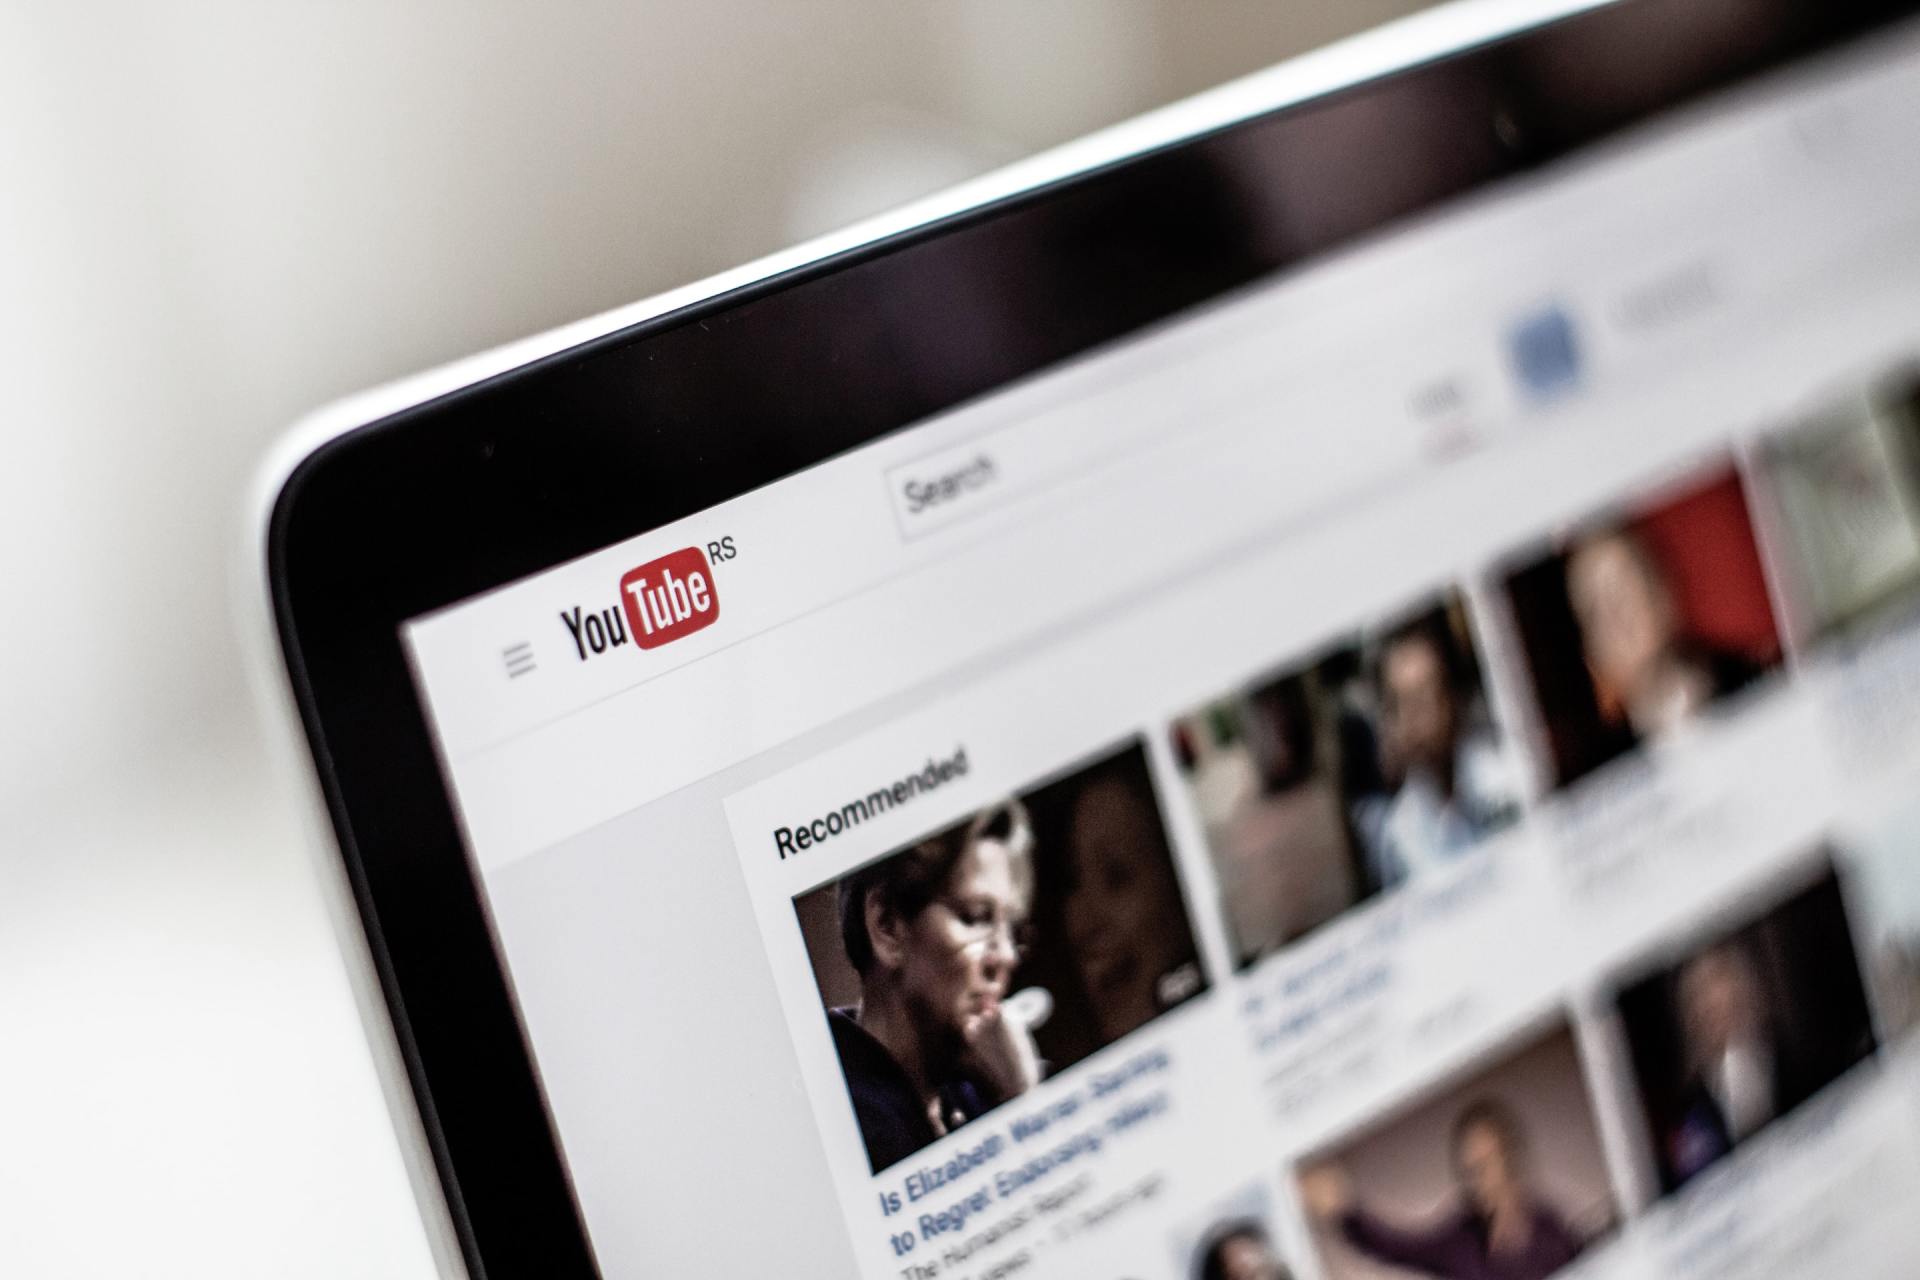 a close up of a laptop screen displaying a youtube page .